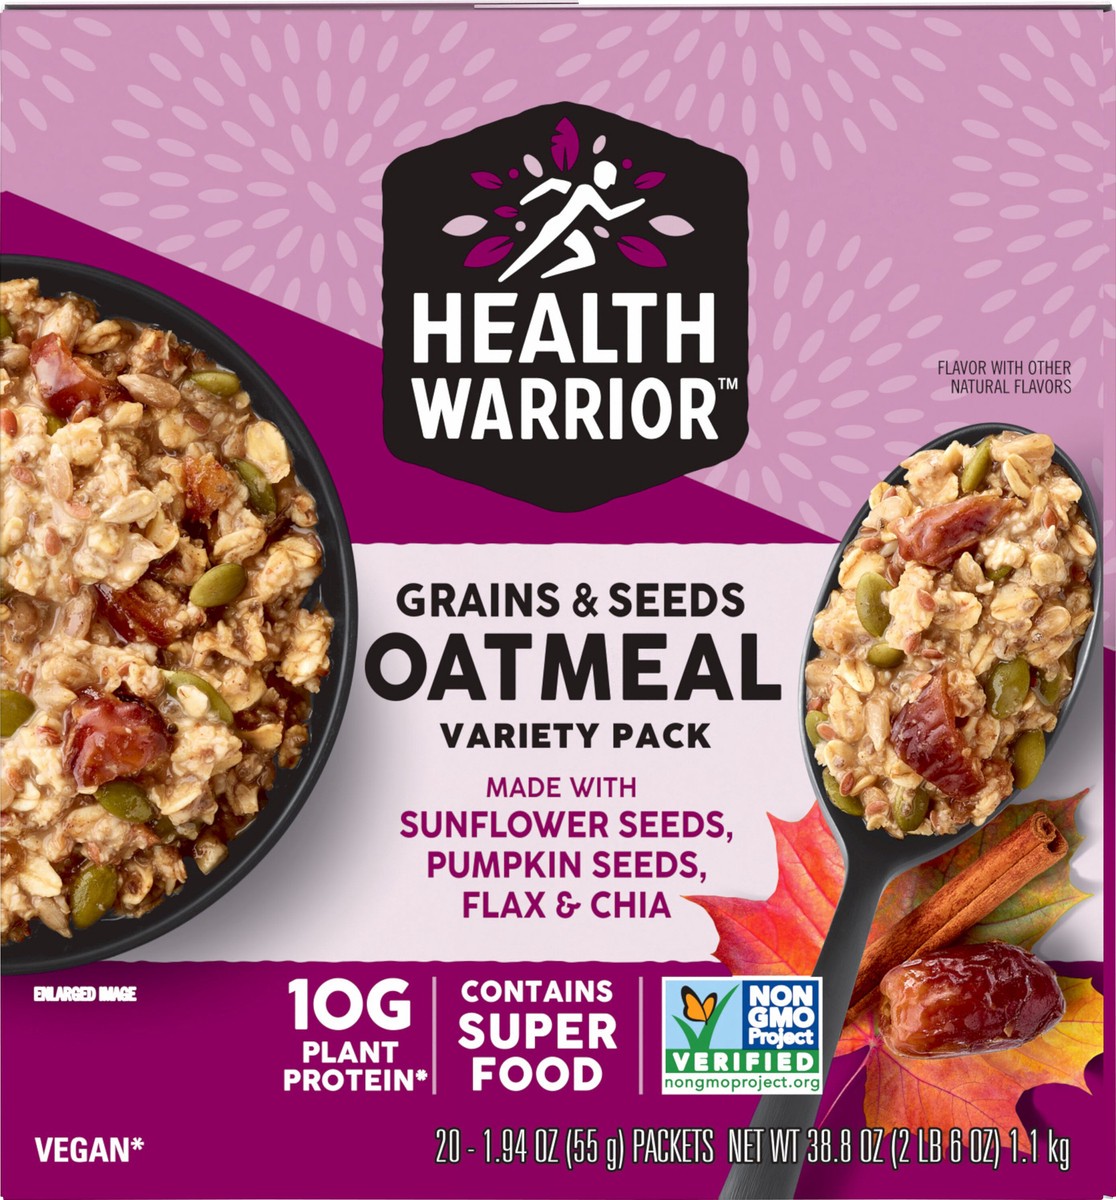 slide 6 of 6, Health Warrior Grains and Seeds Oatmeal Variety Pack 1.94 Oz 20 Count, 20 ct